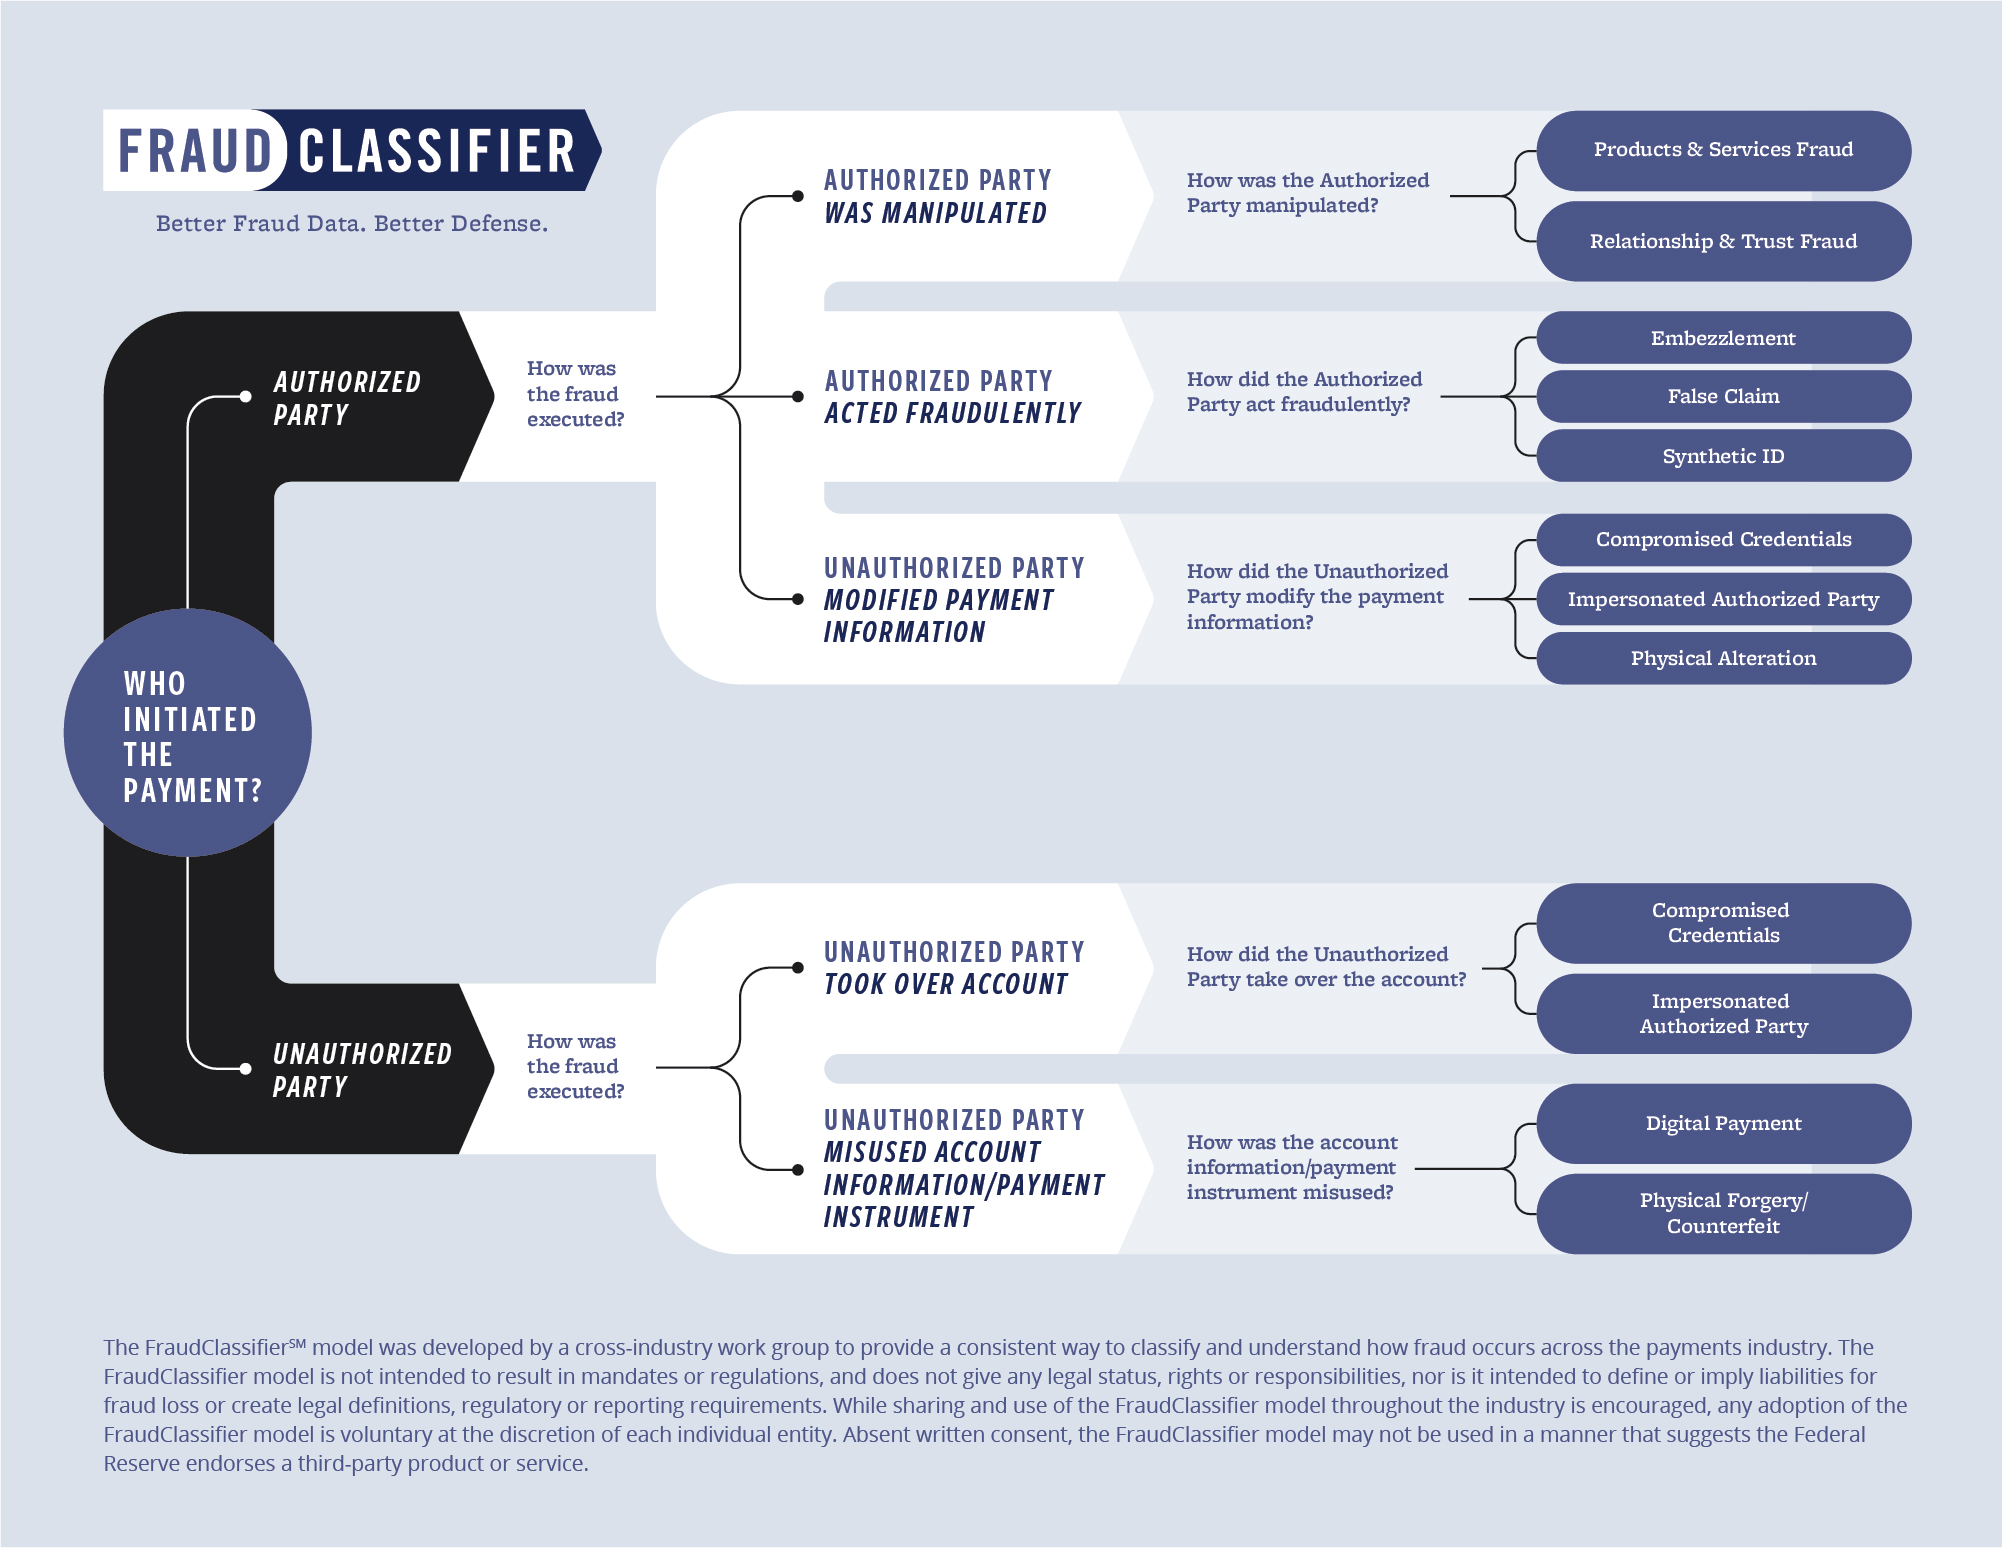 The FraudClassifier model shows two paths to classify fraud involving payments. The model focuses on a series of questions beginning with who initiated the payment to differentiate payments initiated by authorized or unauthorized parties.